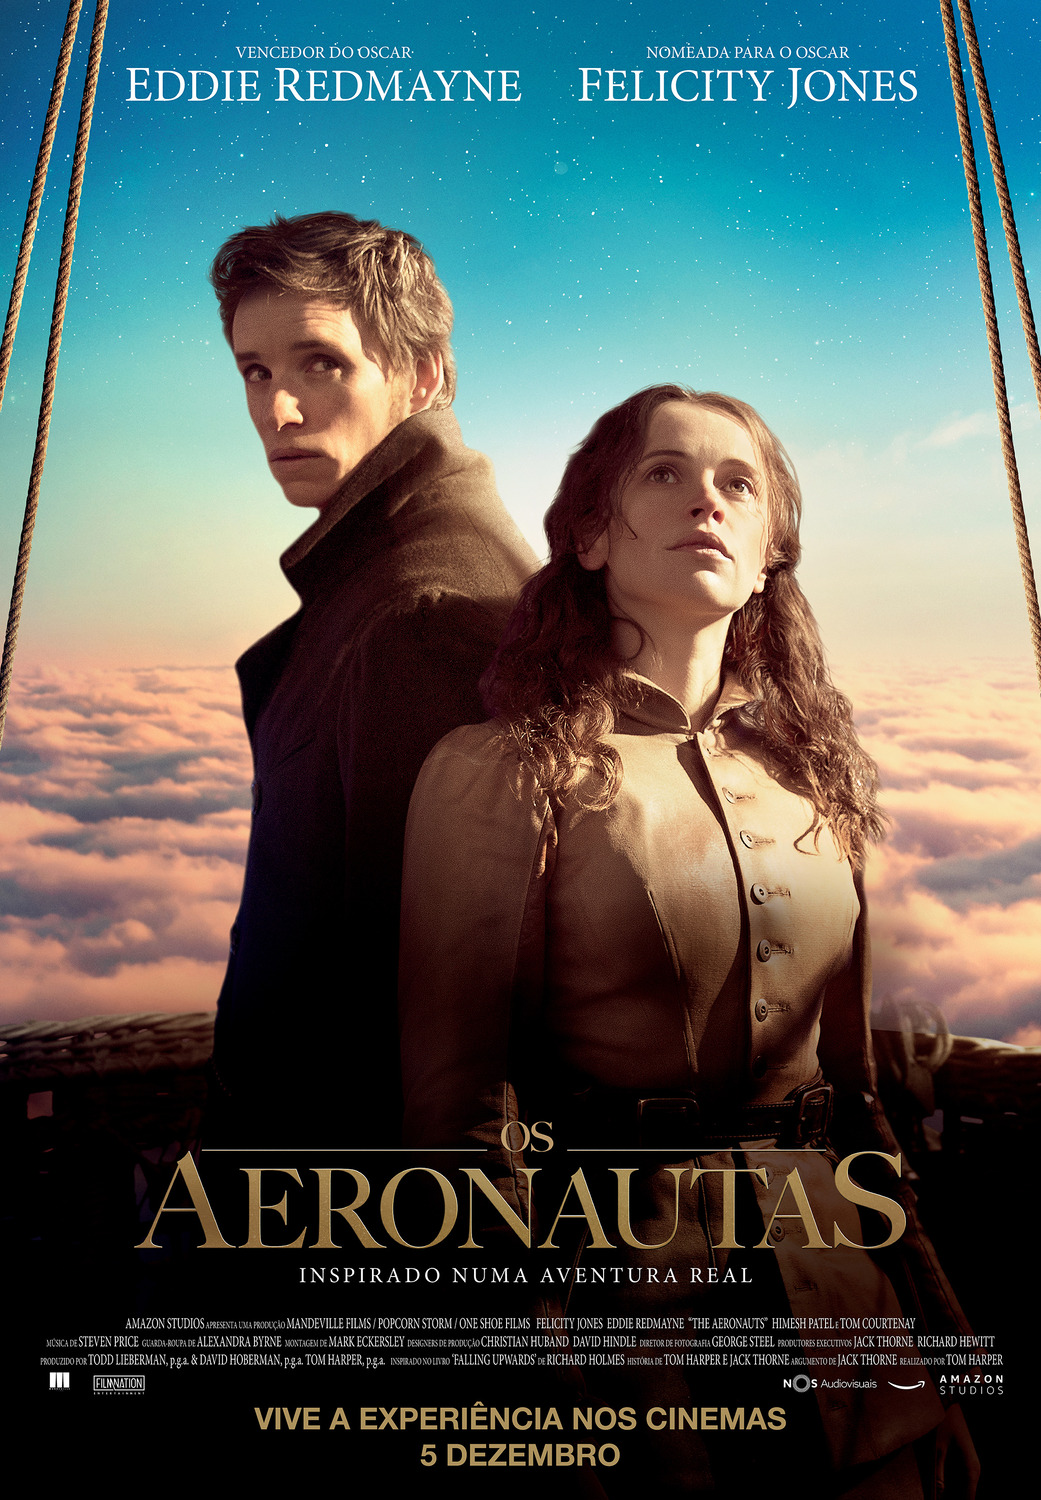 Extra Large Movie Poster Image for The Aeronauts (#6 of 6)